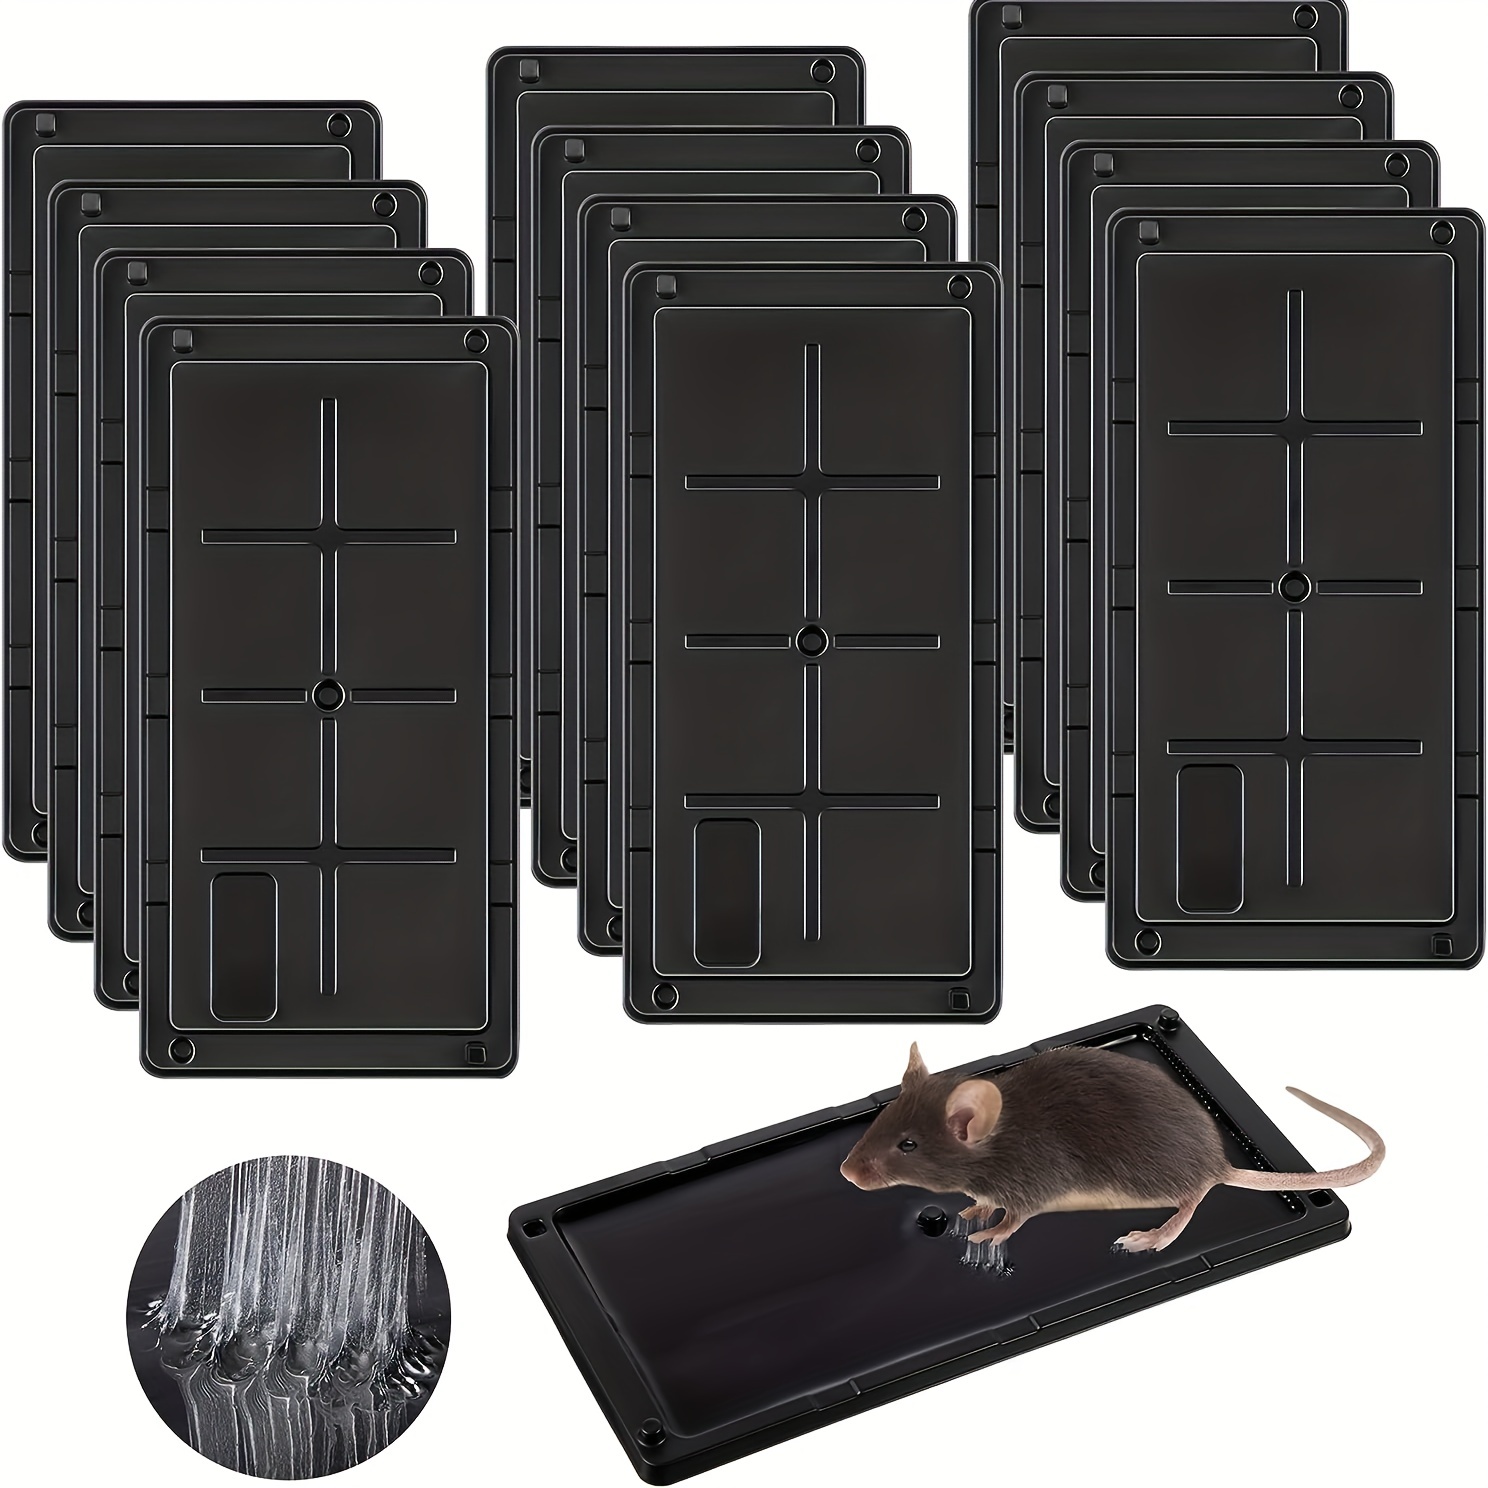 Catchmaster Rat & Mouse Glue Traps 6Pk, Large Bulk Glue Rat Traps, Mouse  Traps Indoor for Home, Pre-Scented Adhesive Plastic Tray for Inside House,  Snake, Mice, & Spider Traps, Pet Safe Pest